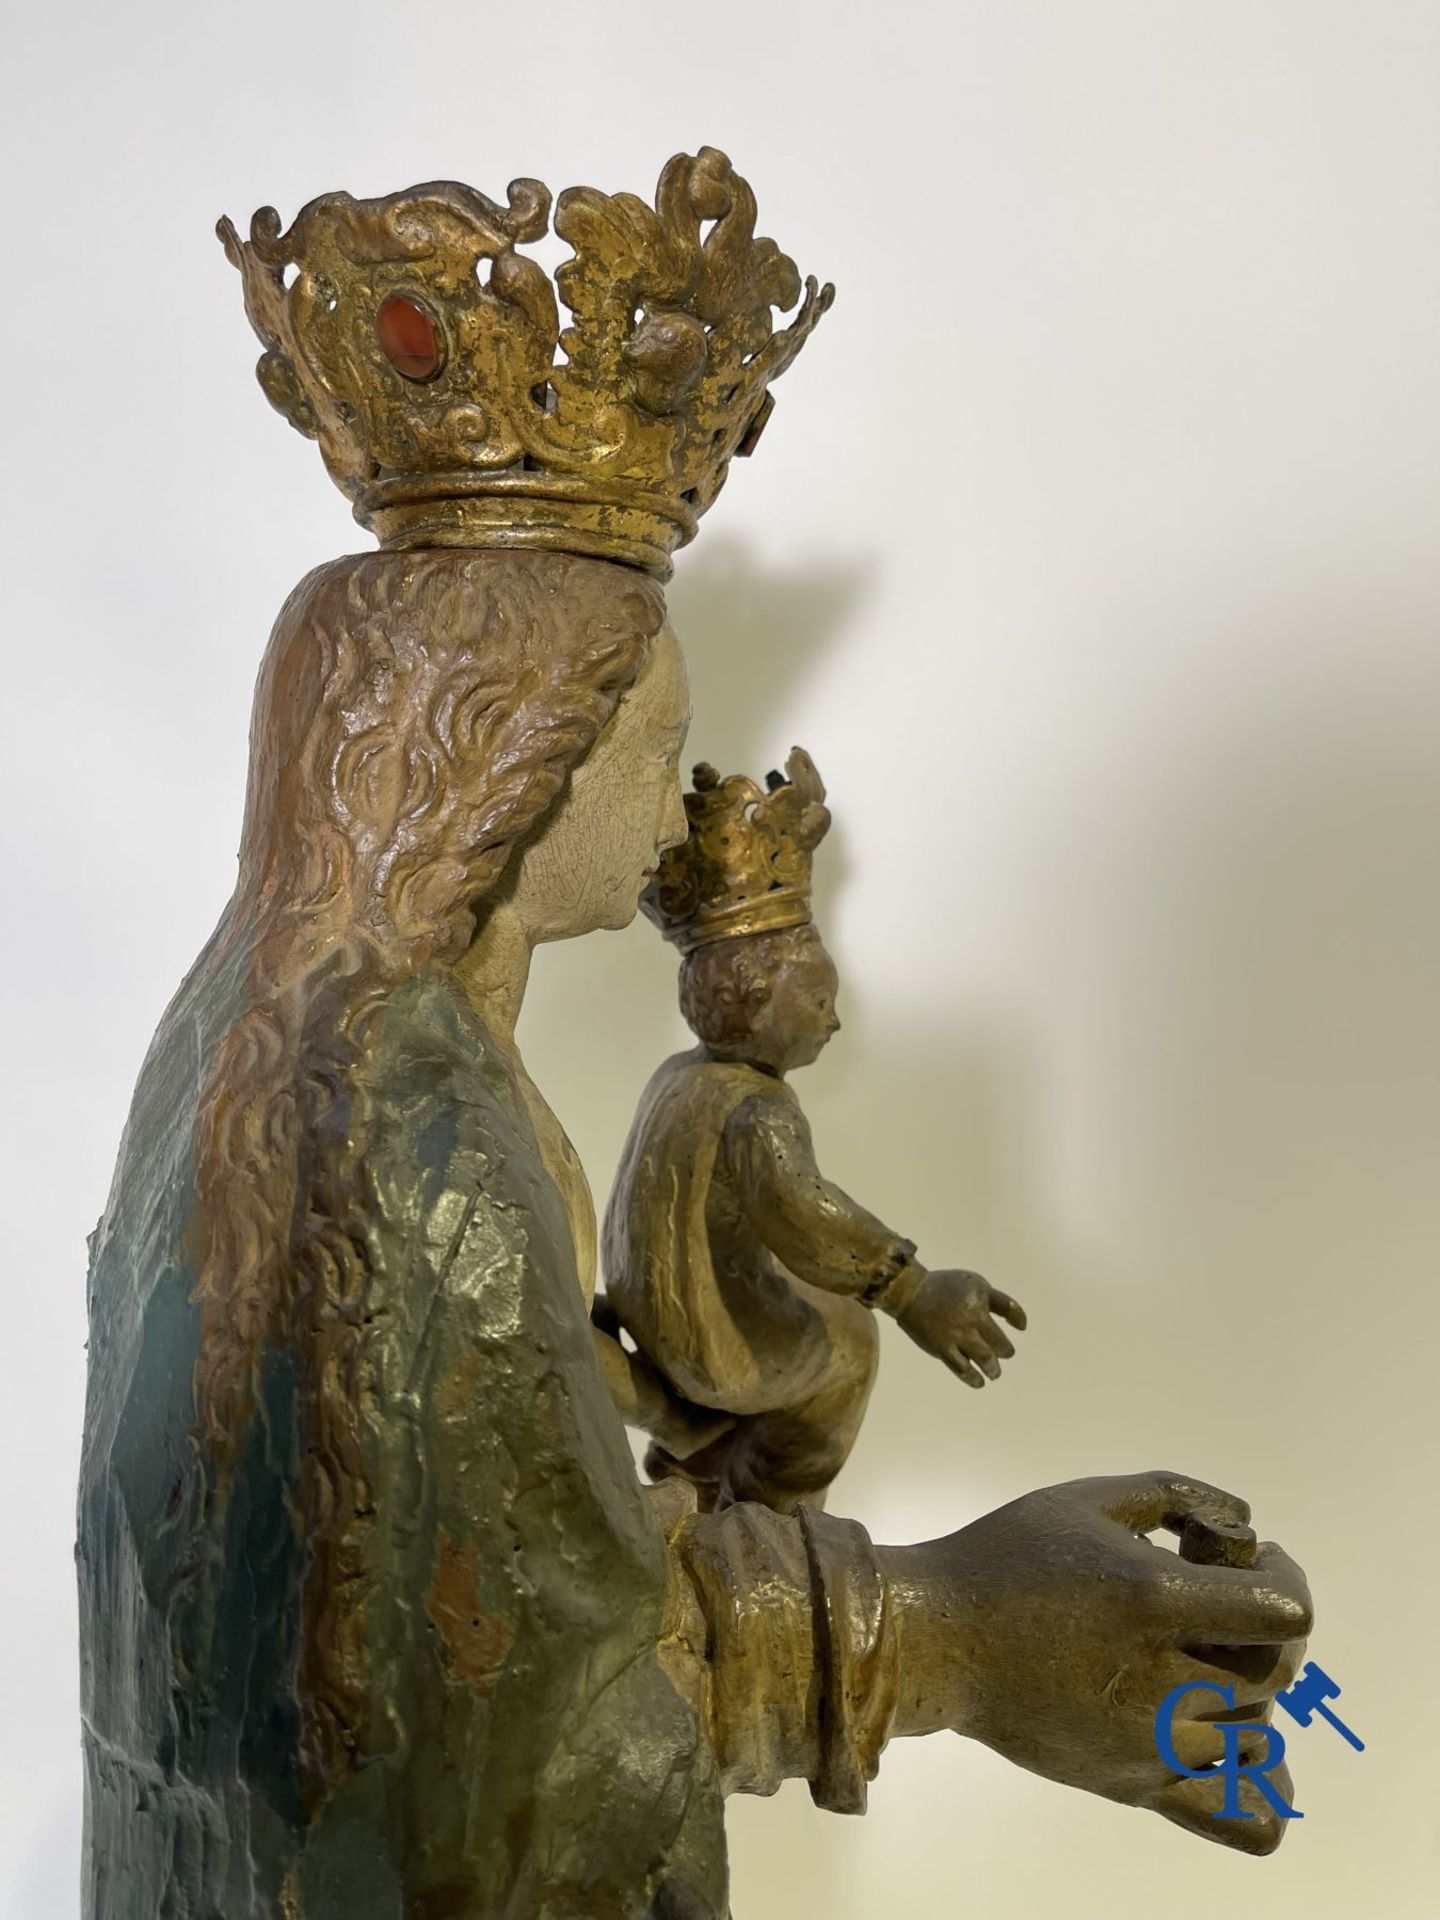 Wooden polychrome Baroque sculpture of Mary with child. The Crown inlaid with an amber-like rock. - Bild 19 aus 30